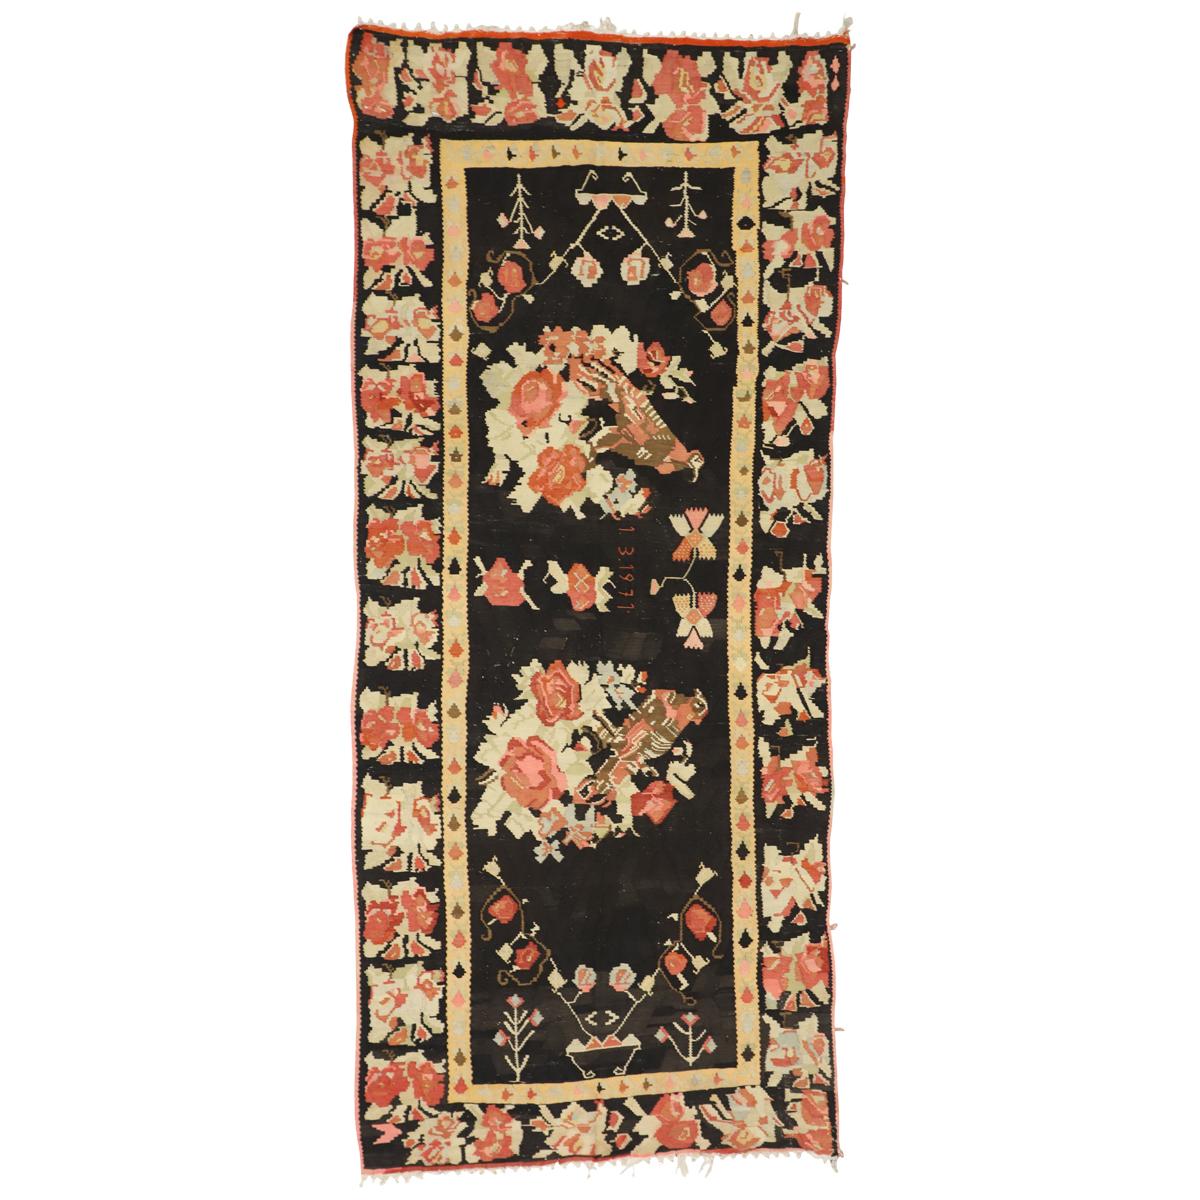 Vintage Floral Turkish Kilim Rug with Chintz Style and Bessarabian Rose Design 